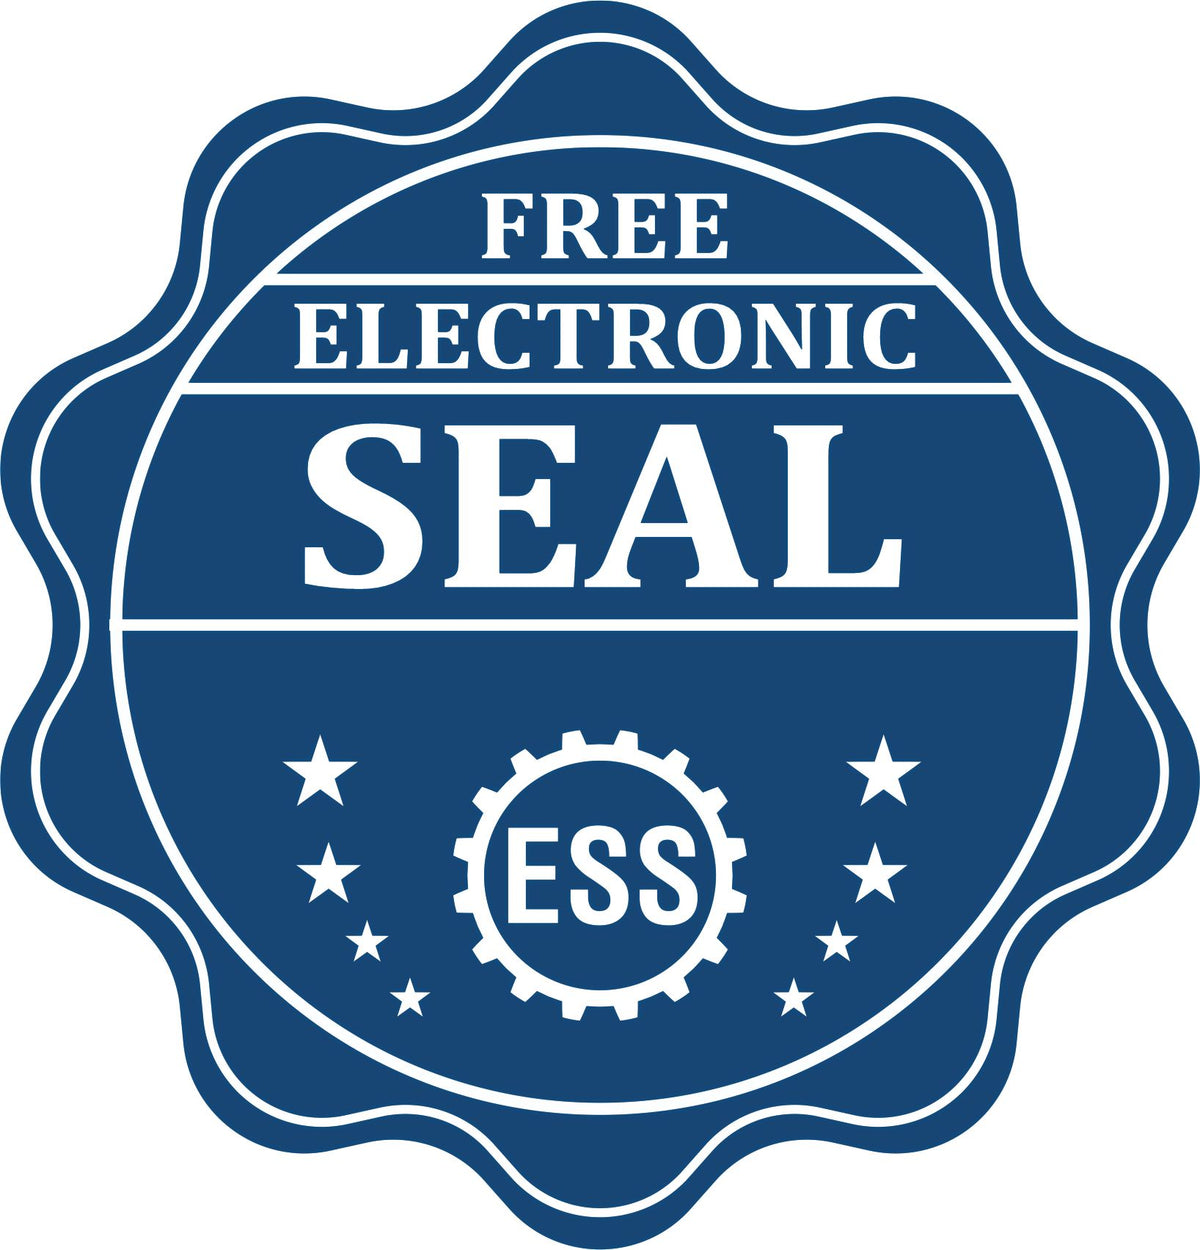 A badge showing a free electronic seal for the District of Columbia Long Reach Architectural Embossing Seal with stars and the ESS gear on the emblem.